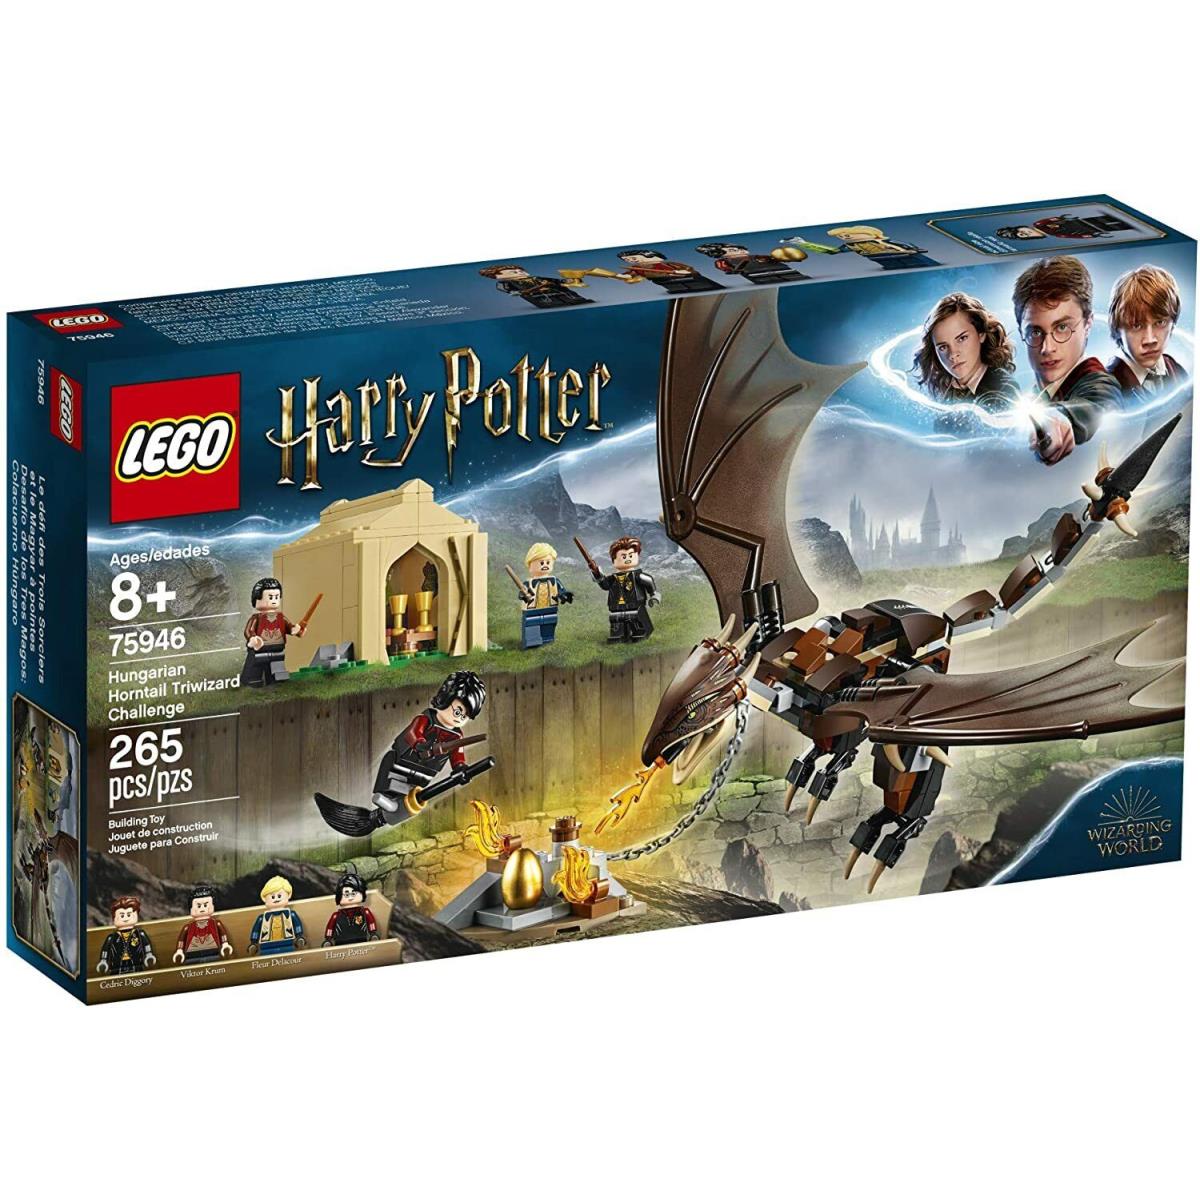 Lego Hungarian Horntail Triwizard Challenge Harry Potter Set 75946